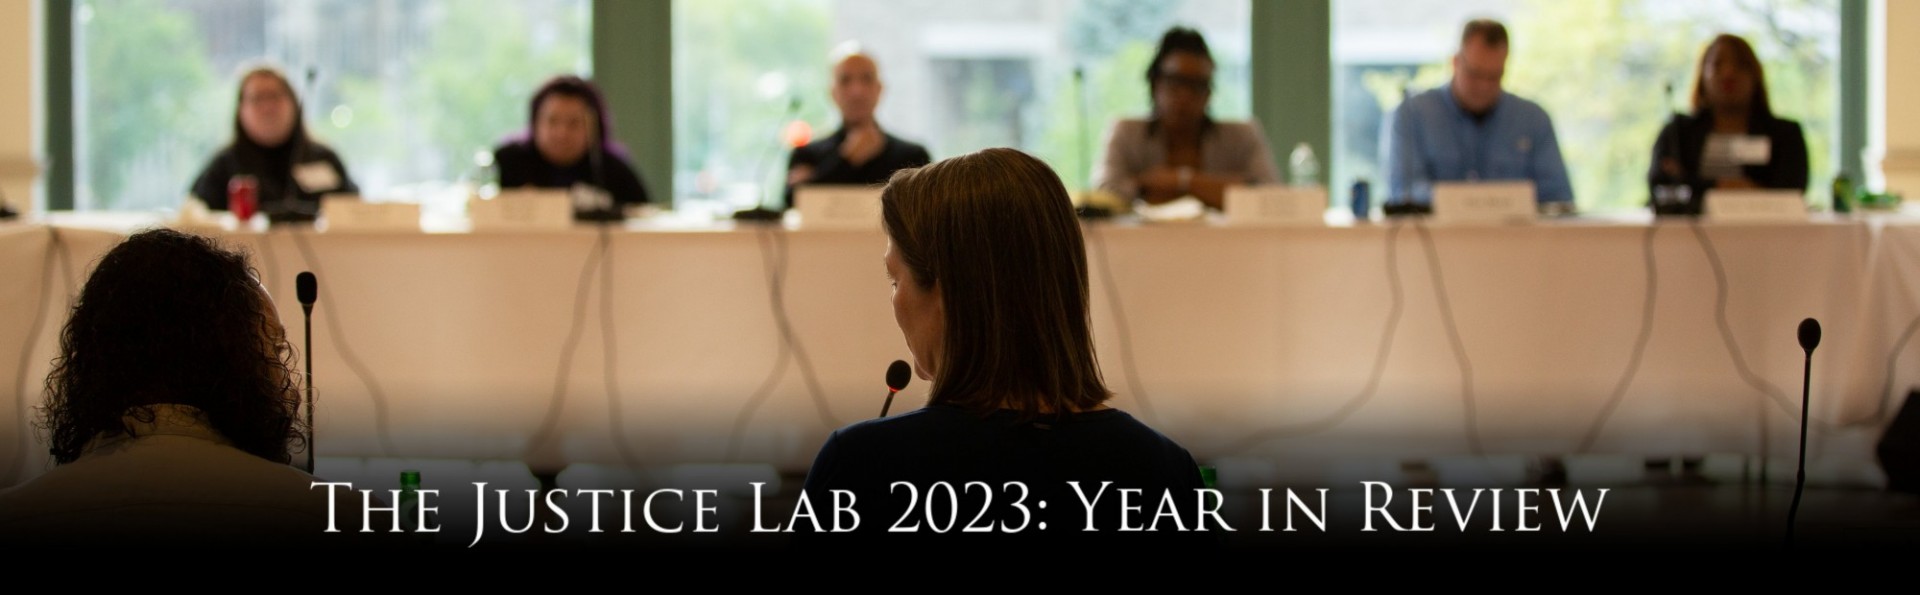 The Justice Lab 2023: Year in Review